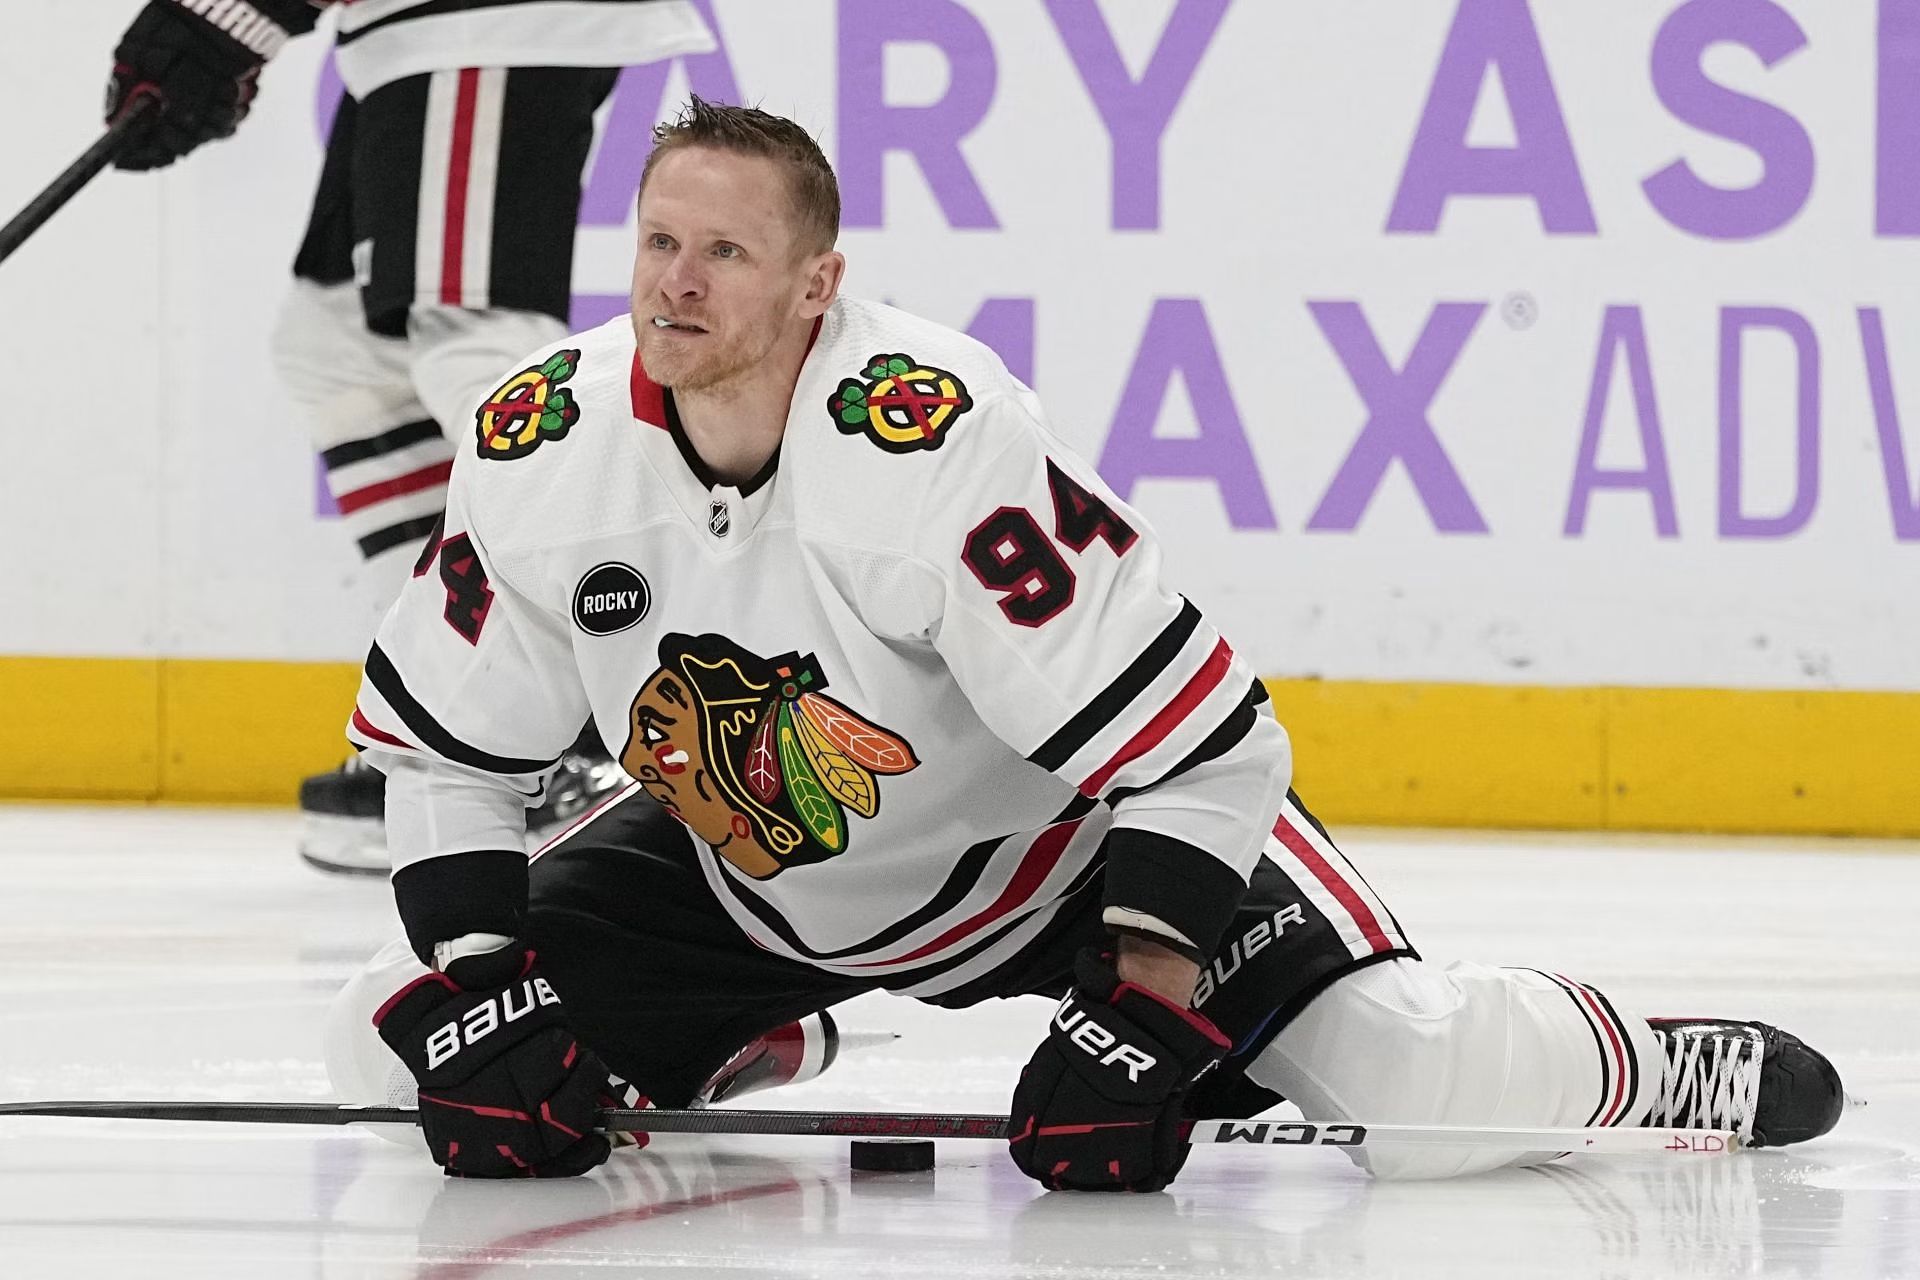 chicago-blackhawks-gm-denies-corey-perrys-contract-cut-tied-to-alleged-affair